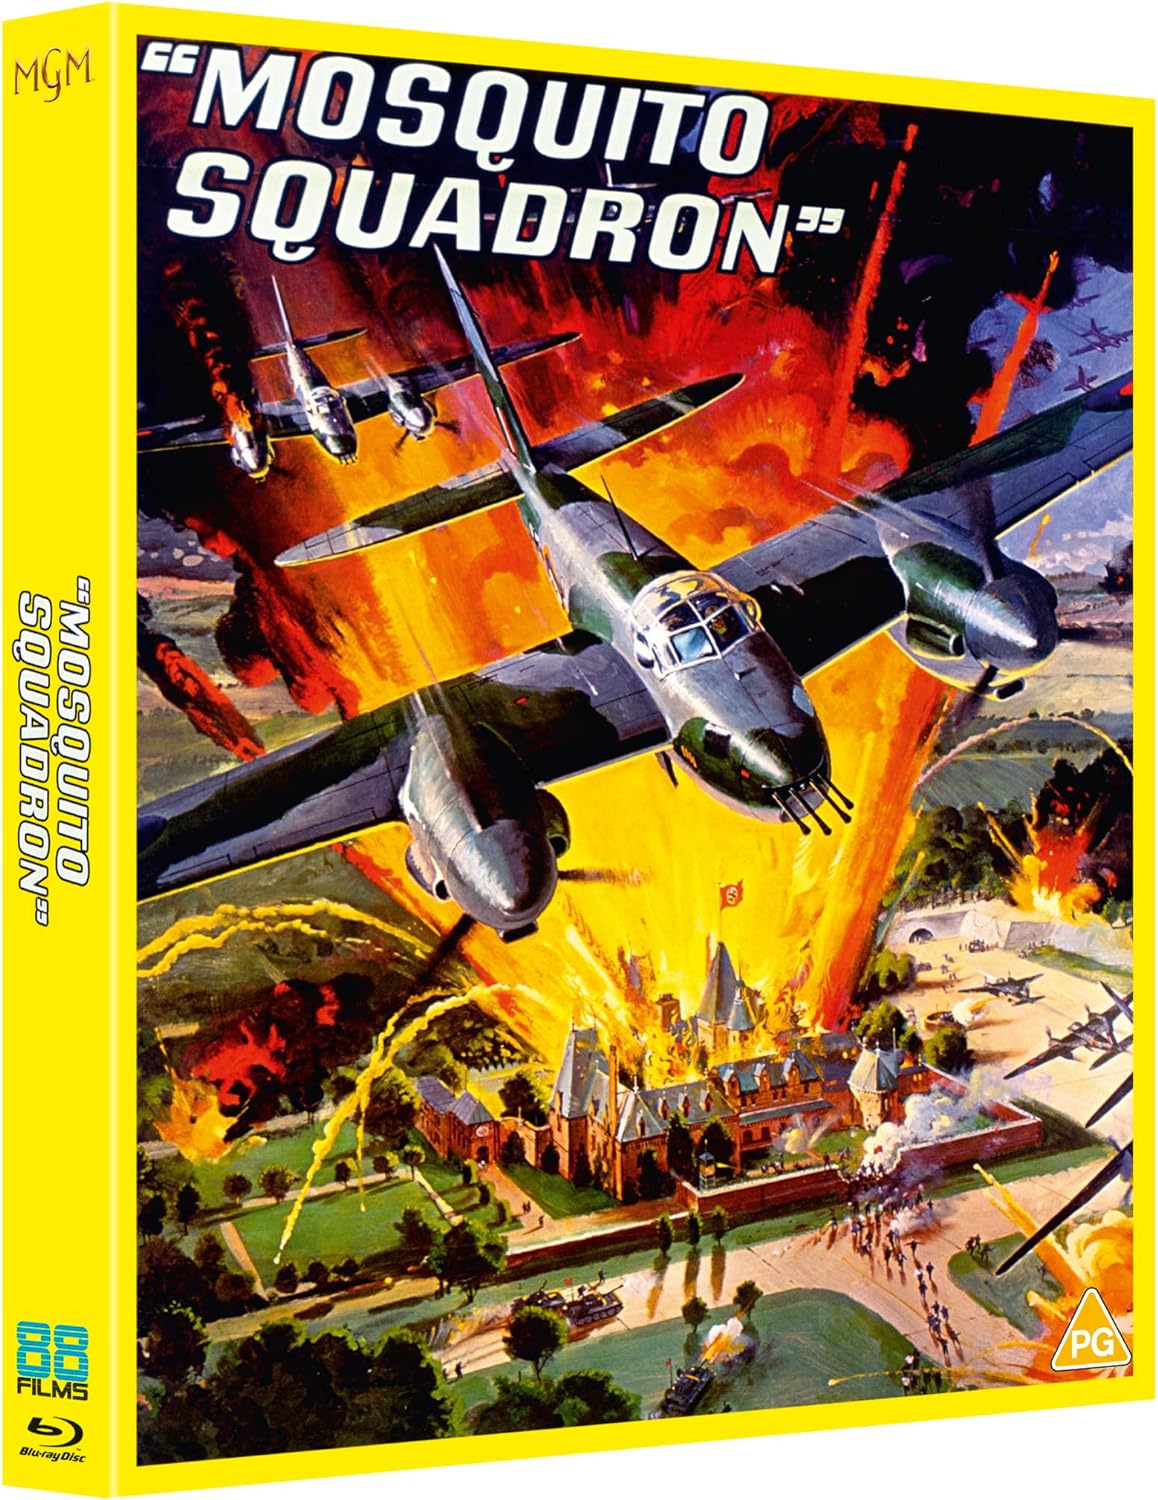 Mosquito Squadron Blu-ray with Slipcover (88 Films/Region B) [Preorder]